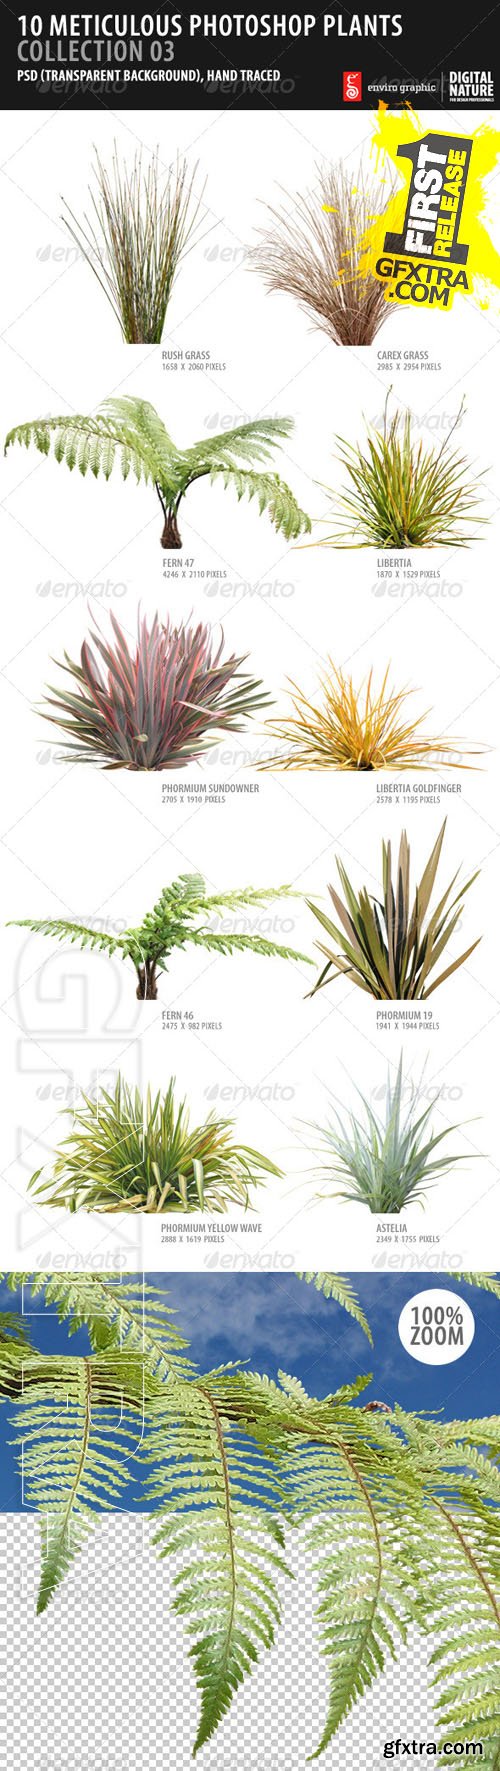 GraphicRiver - 10 Meticulous Photoshop Plants Collection 03